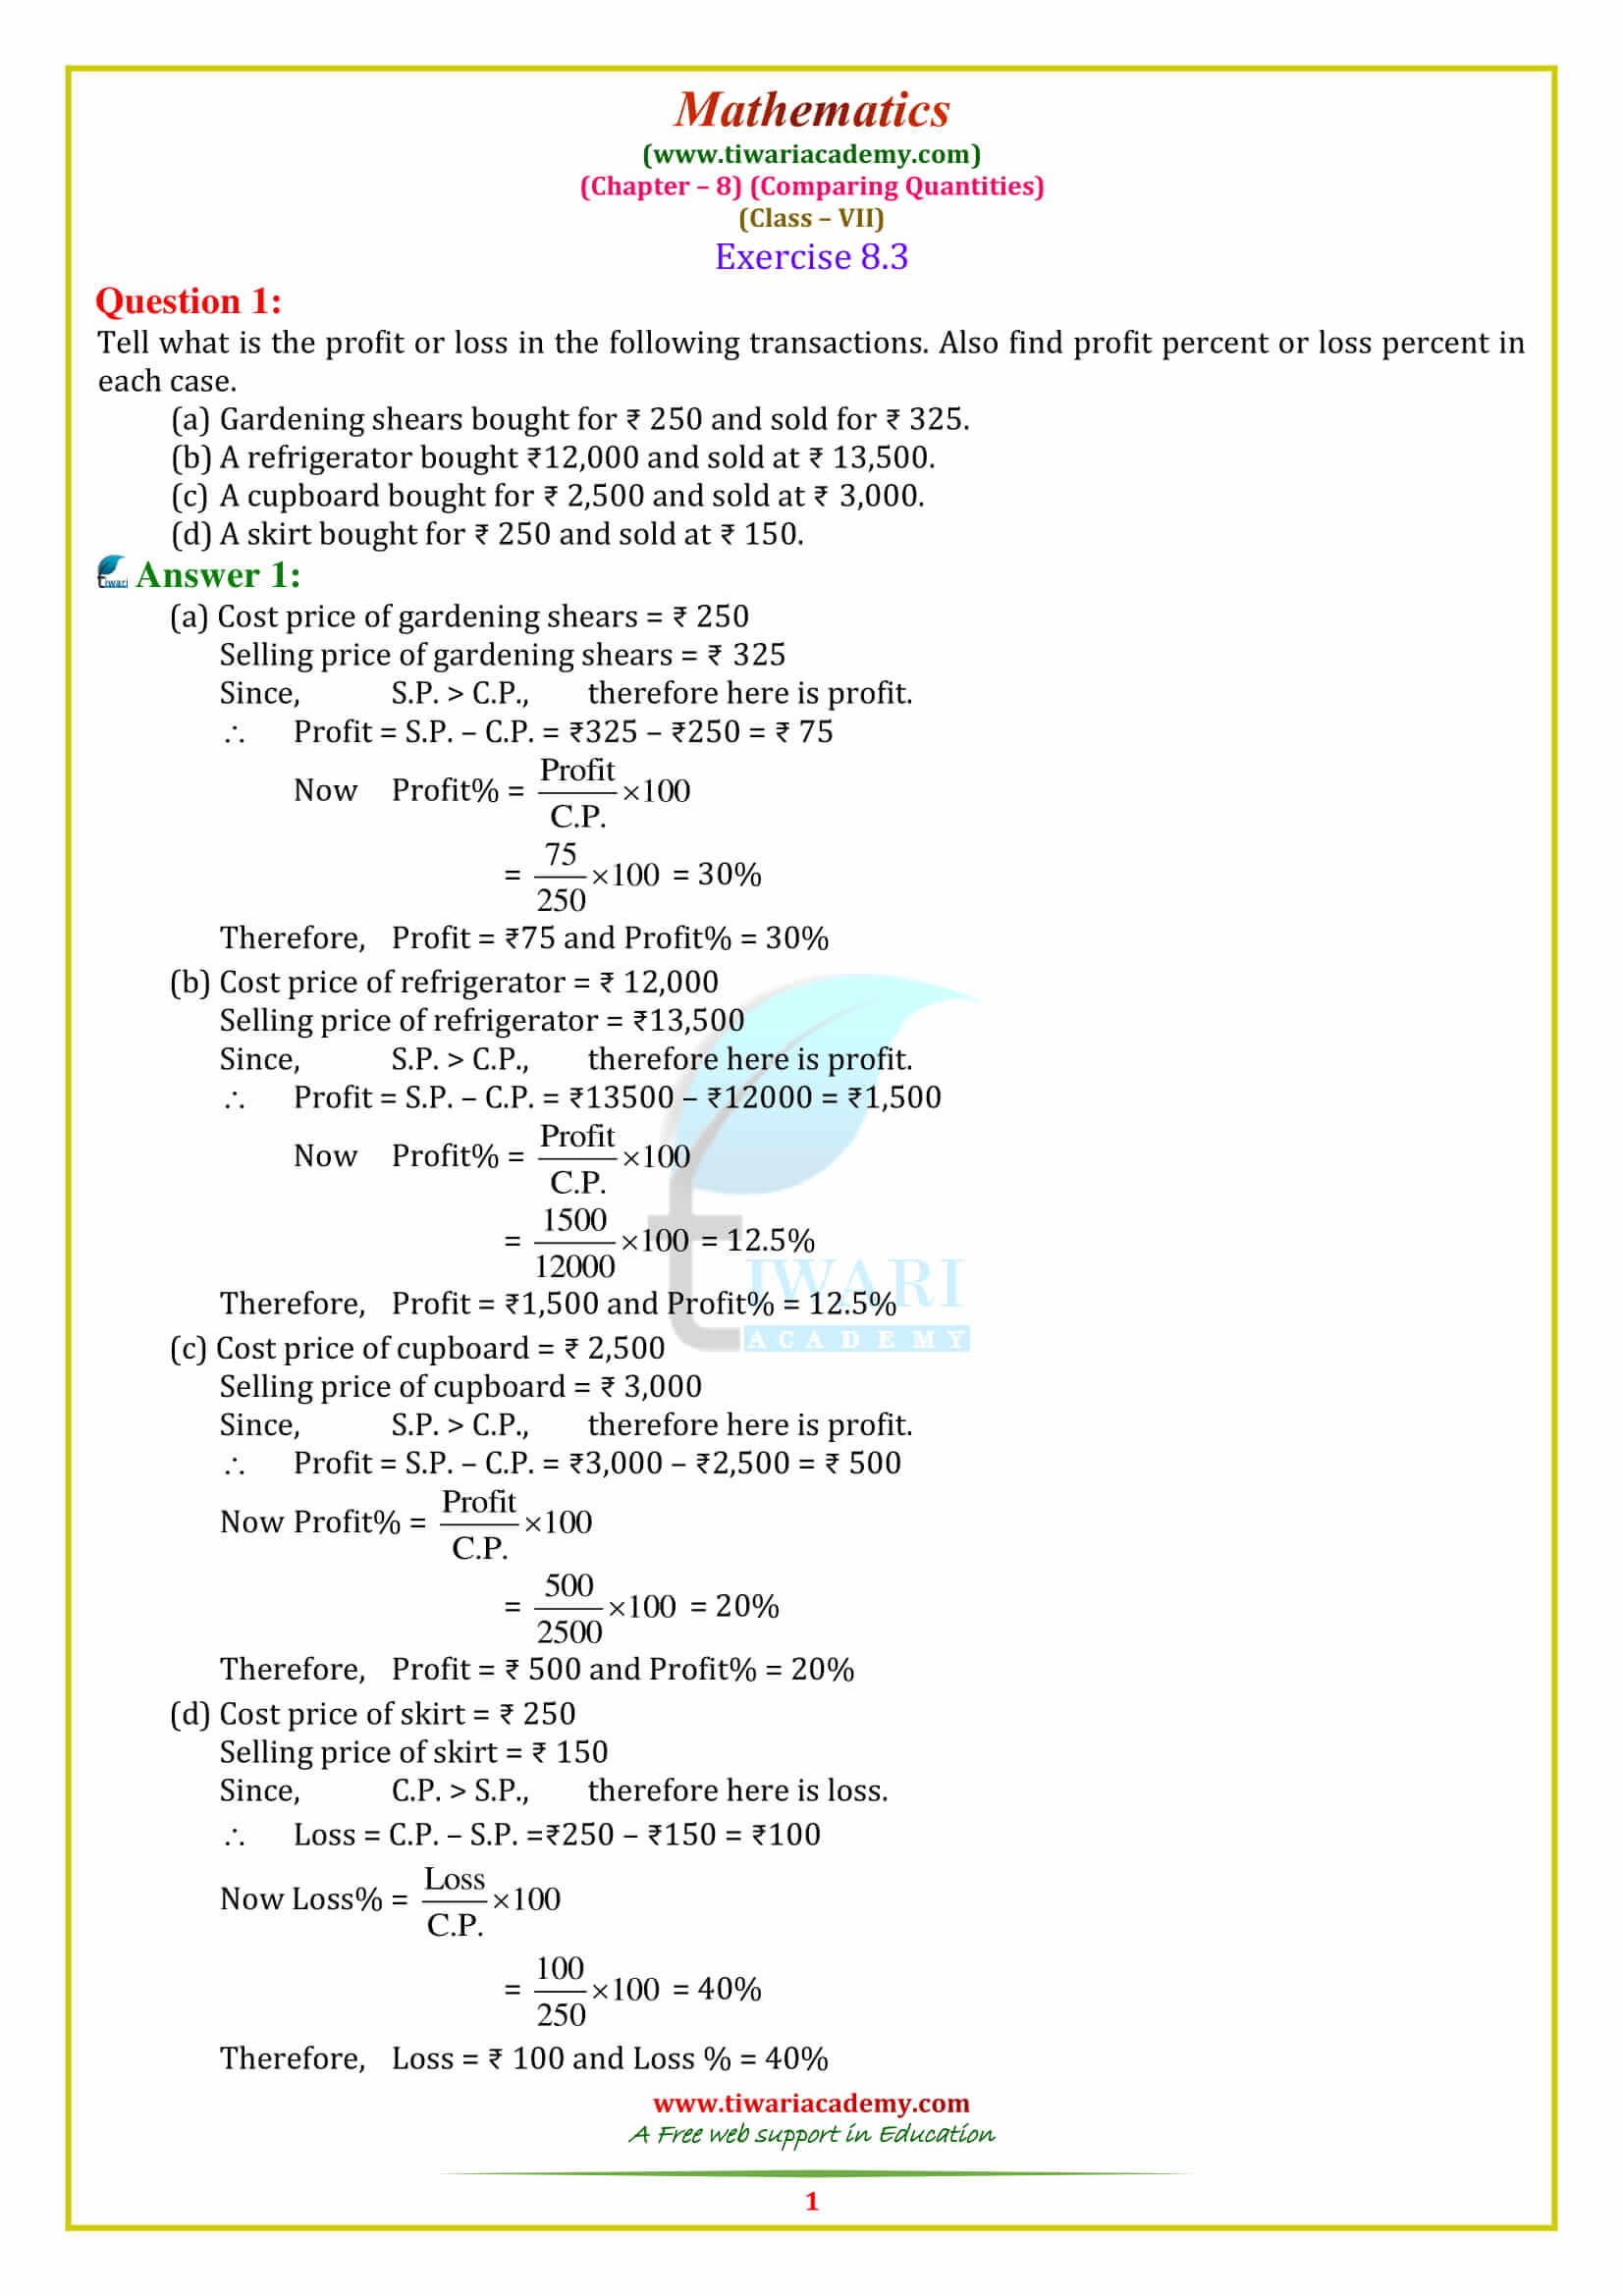 NCERT Solutions for Class 7 Maths Chapter 8 Comparing Quantities Exercise 8.3